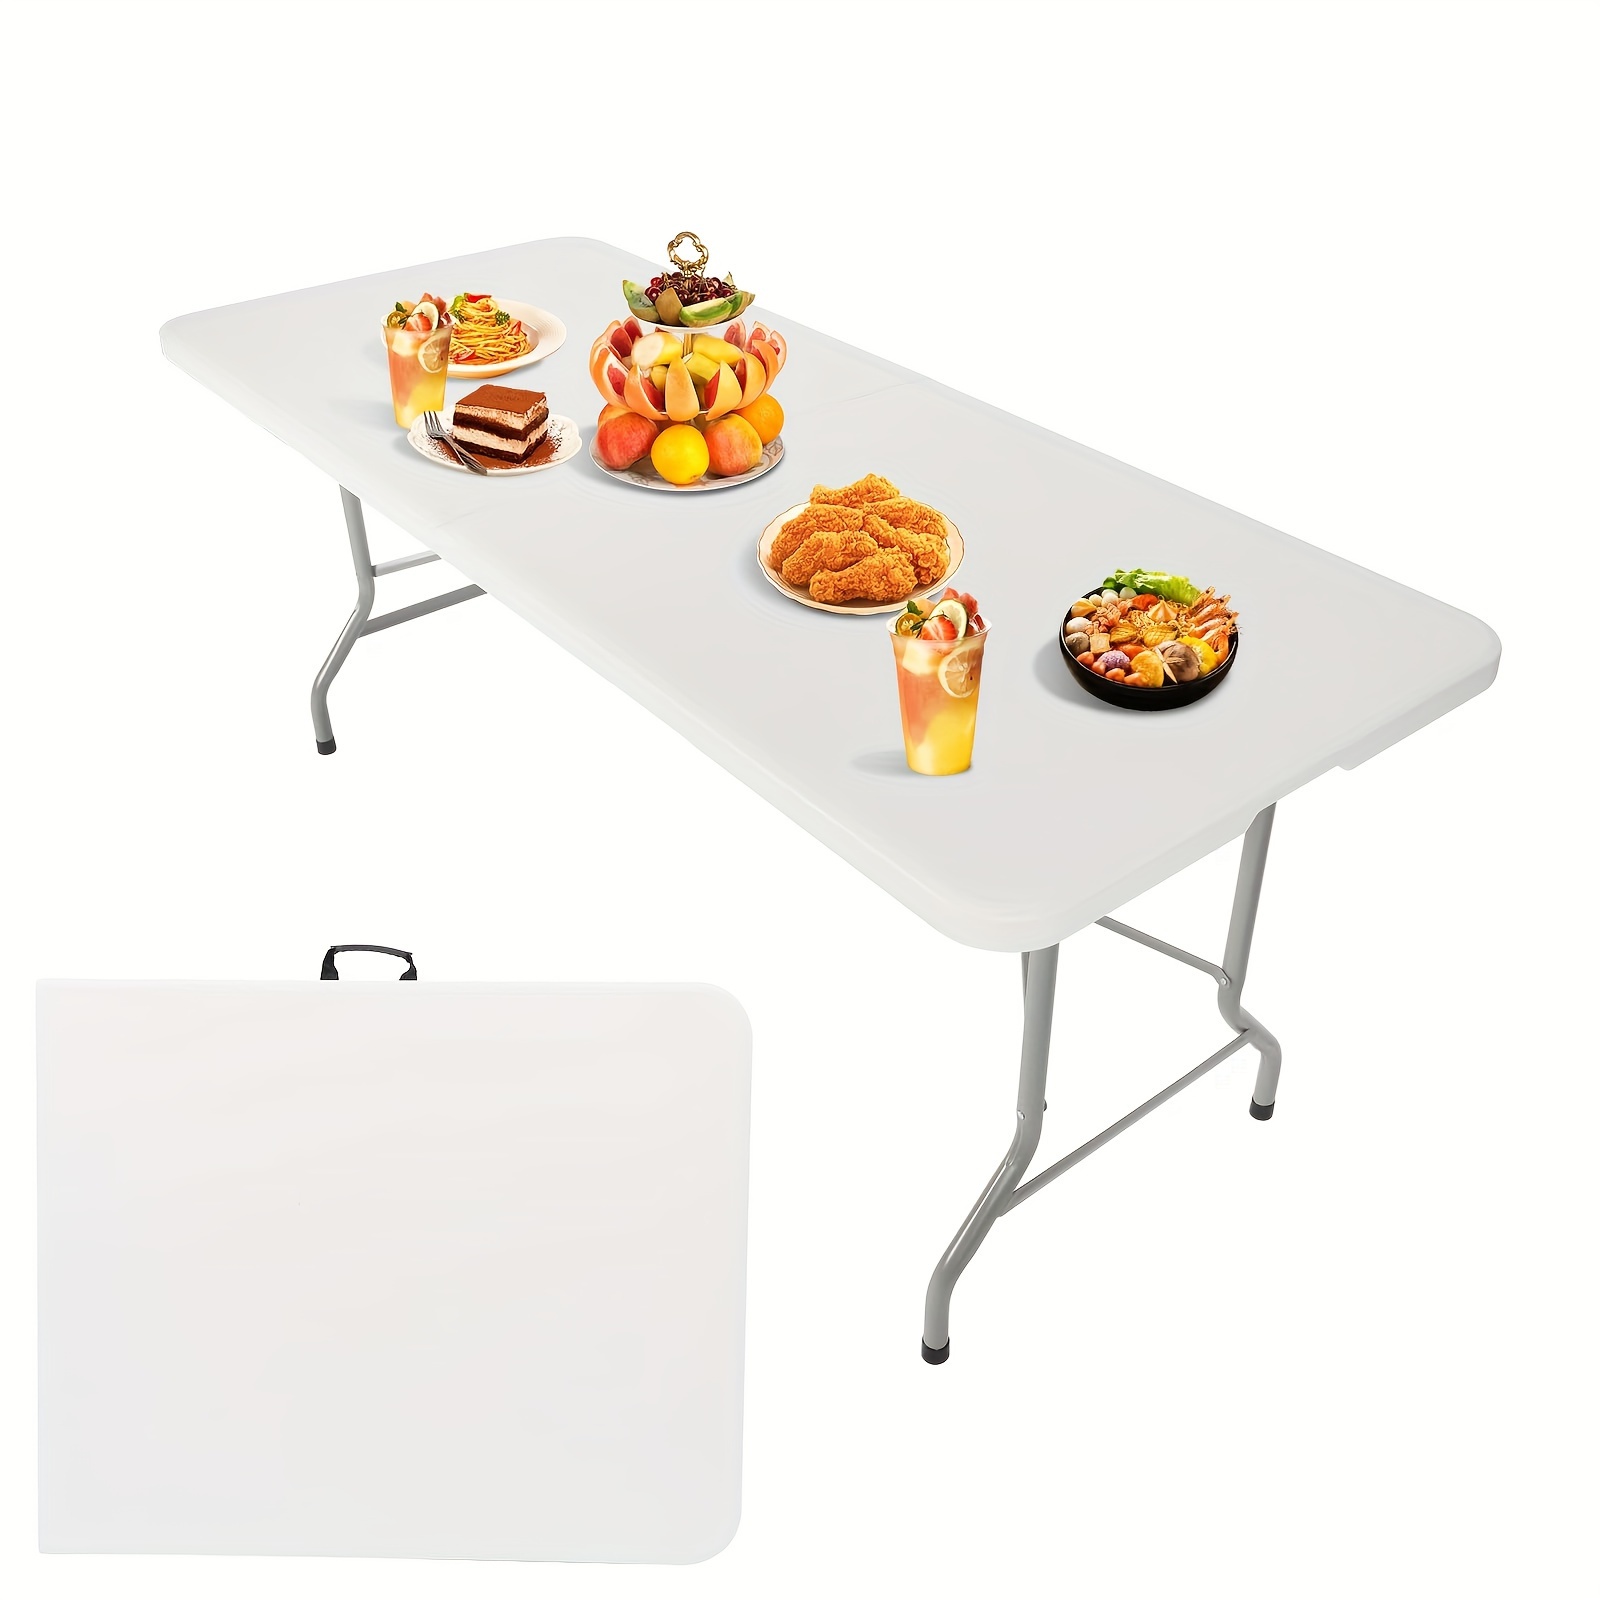 

Folding Tables Heavy Duty Camping Small Table With Carrying Handle Utility Indoor Outdoor Foldable Portable Fold-in-half Plastic Dining Picnic Party Table For Parties Dining Picnic White